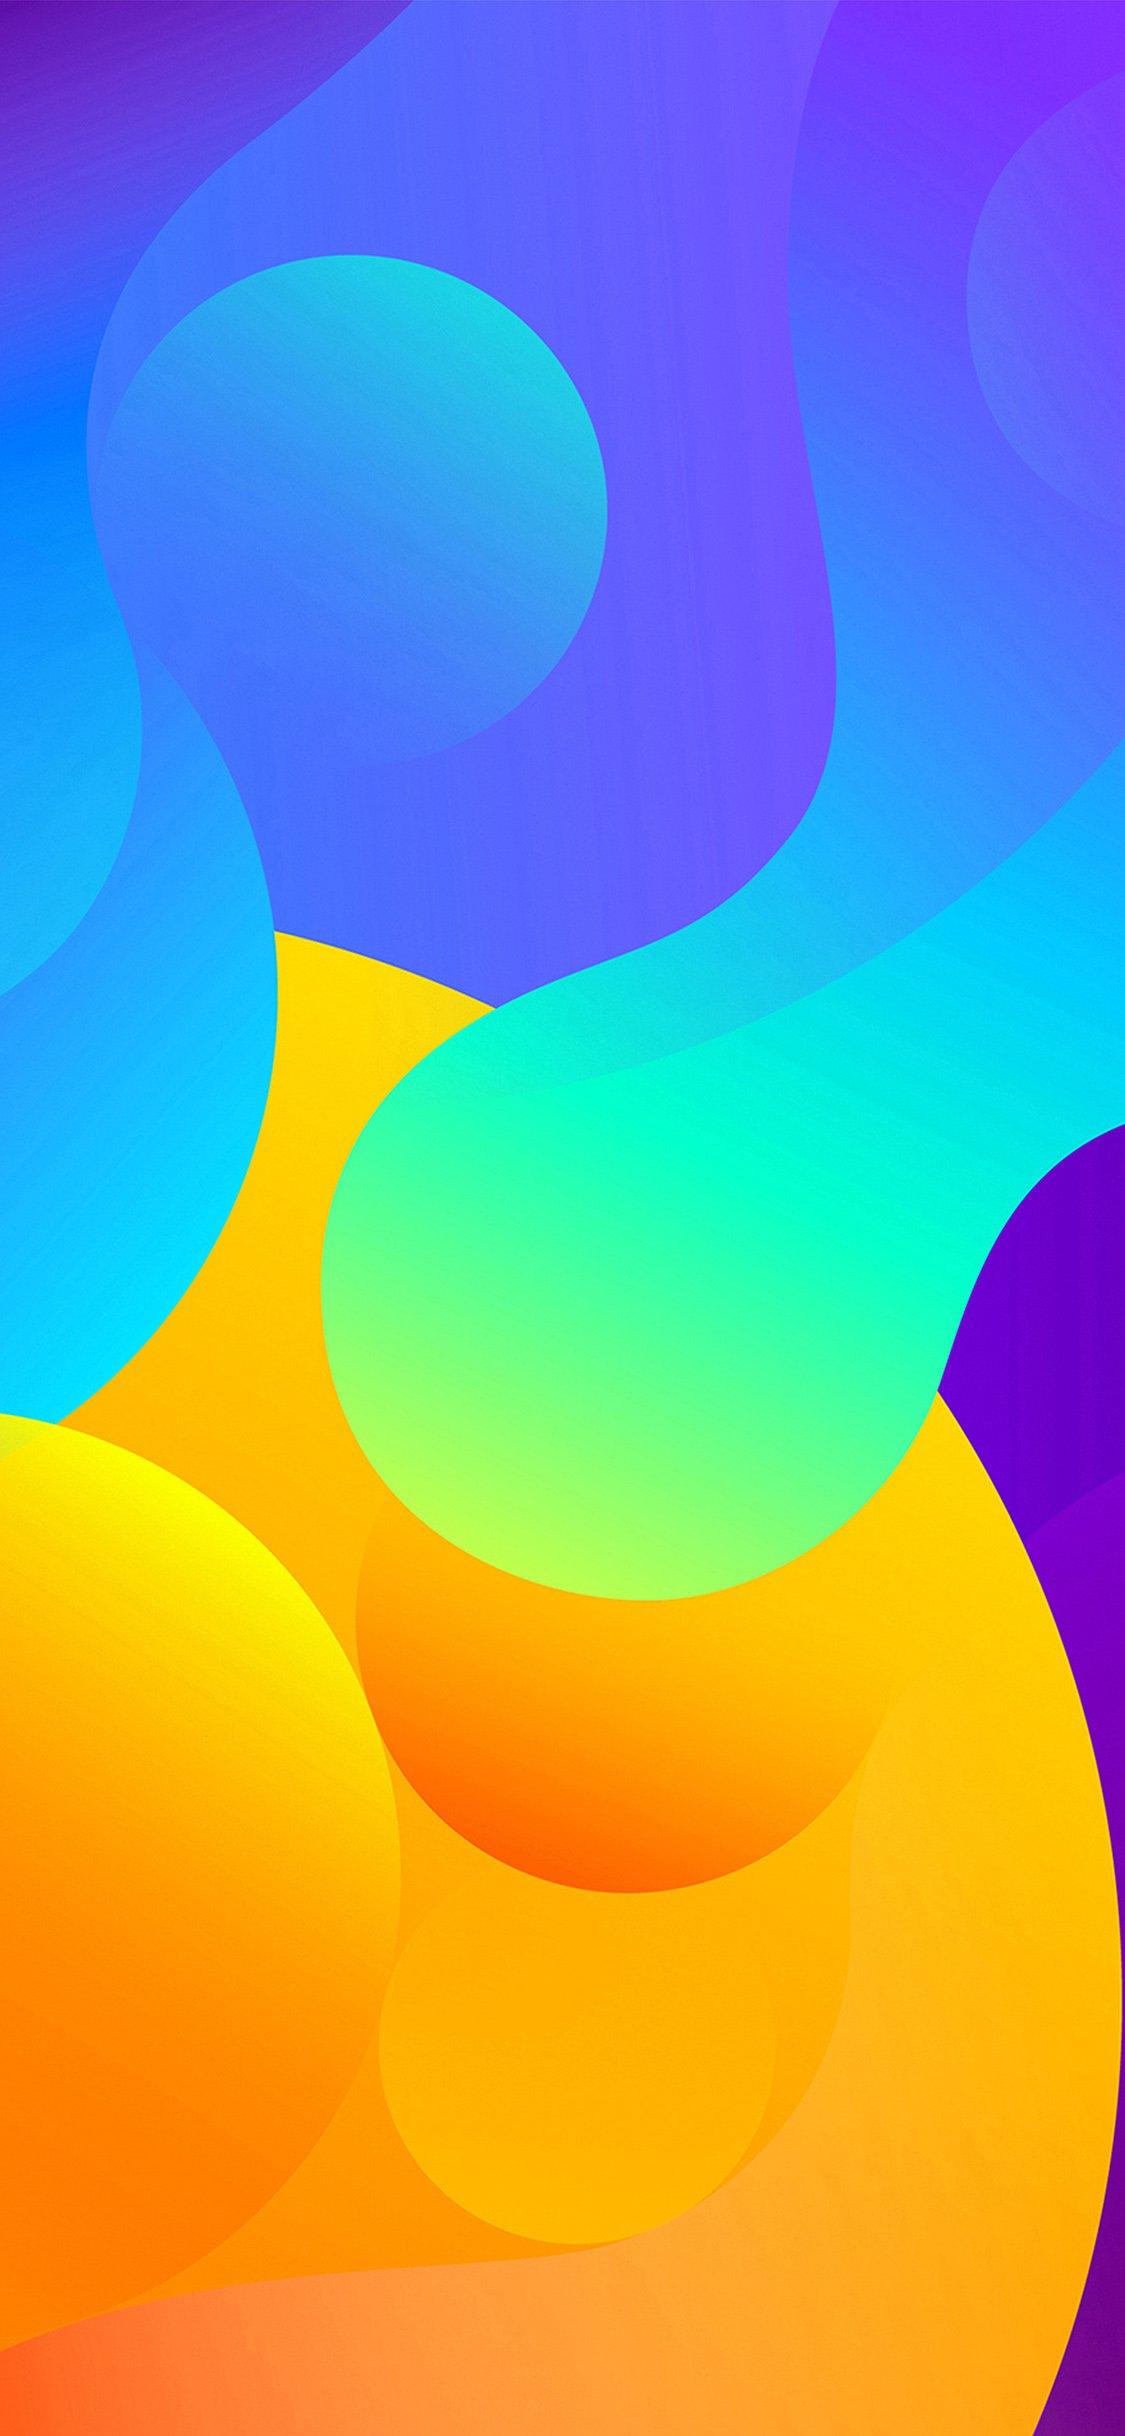 iPhone X wallpaper. abstract art color basic background pattern